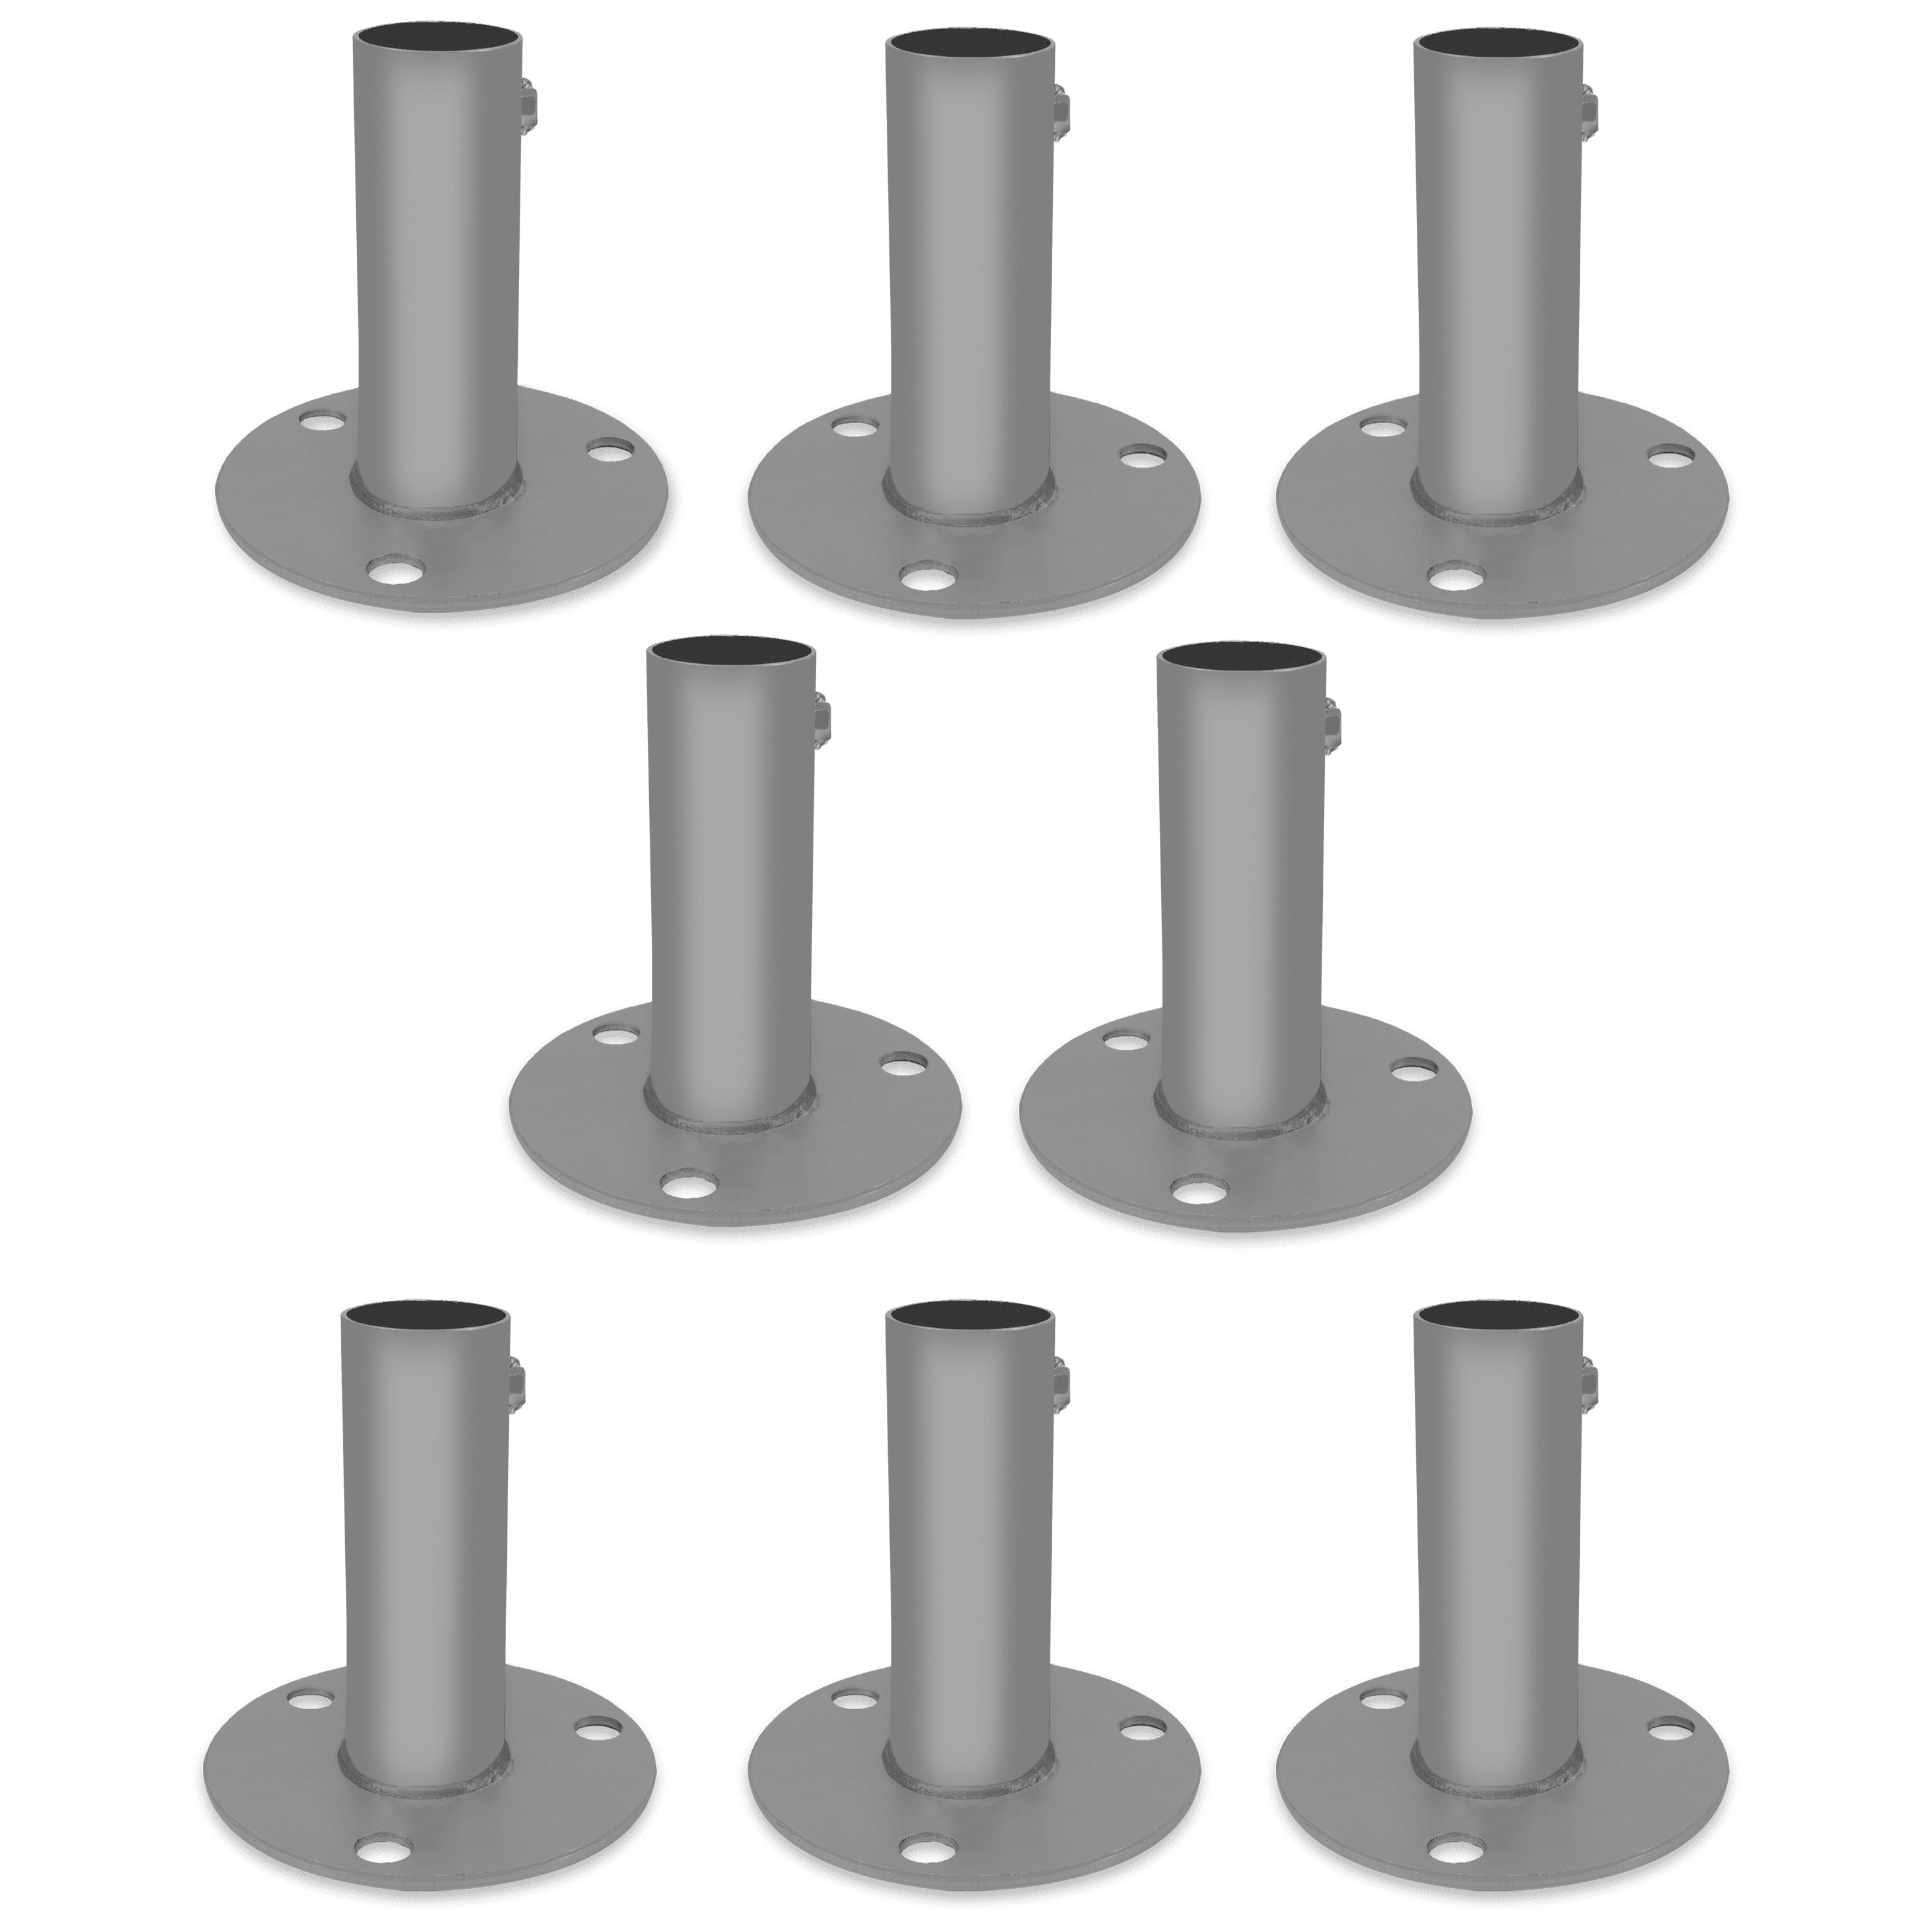 FFCBW 4 Heavy duty 2 Way Connector fittings for 1 Inch EMT Canopy Fittings 